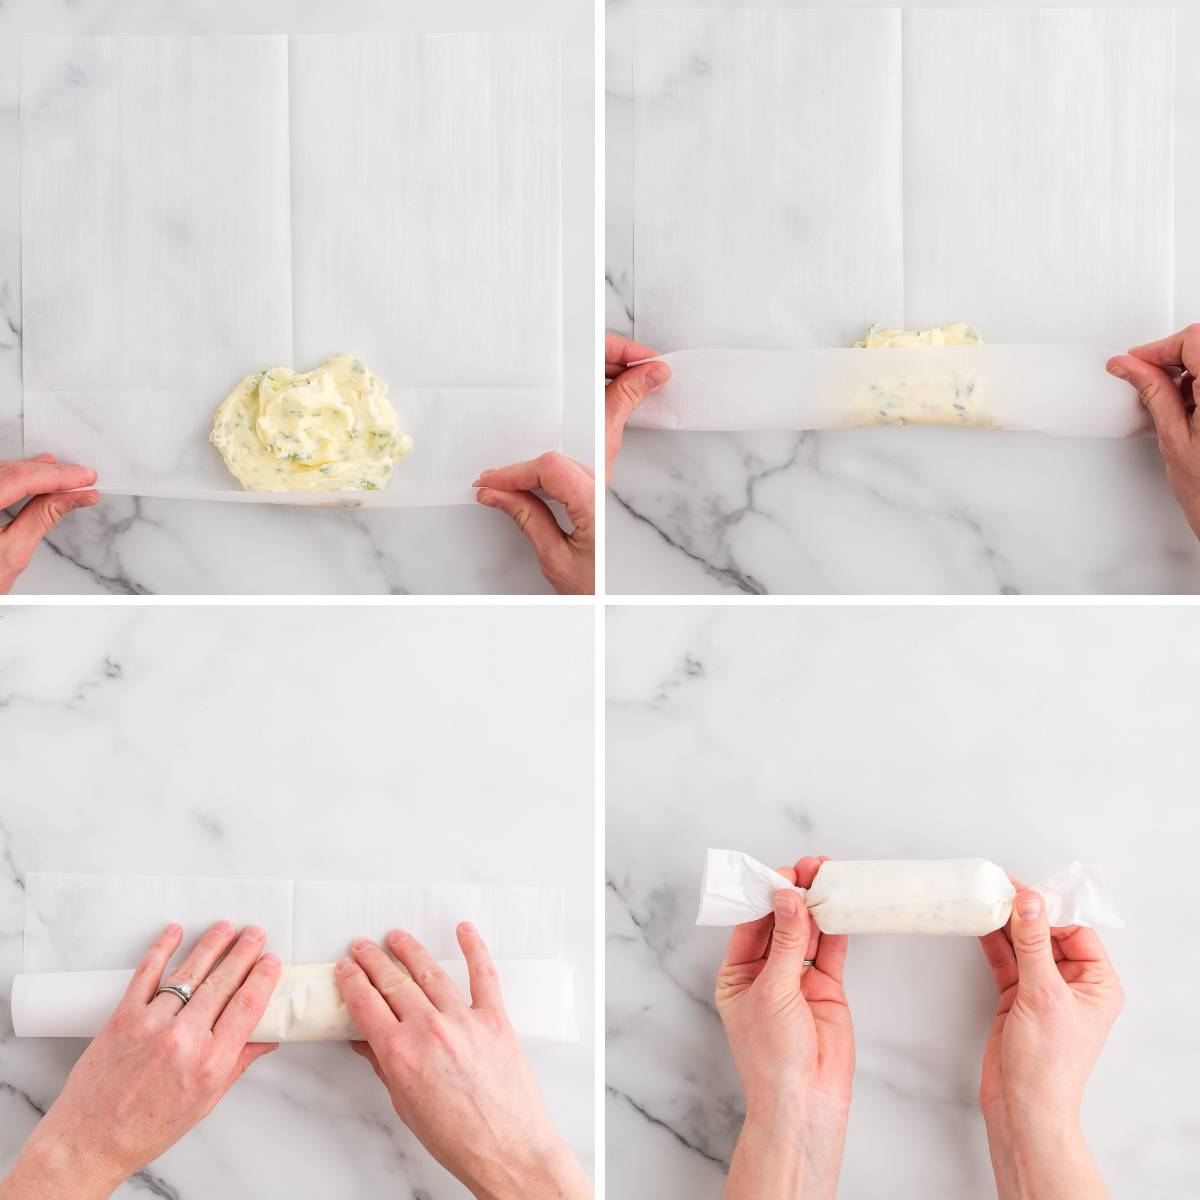 Four steps to adding soft butter to a piece of wax paper and rolling it up. 